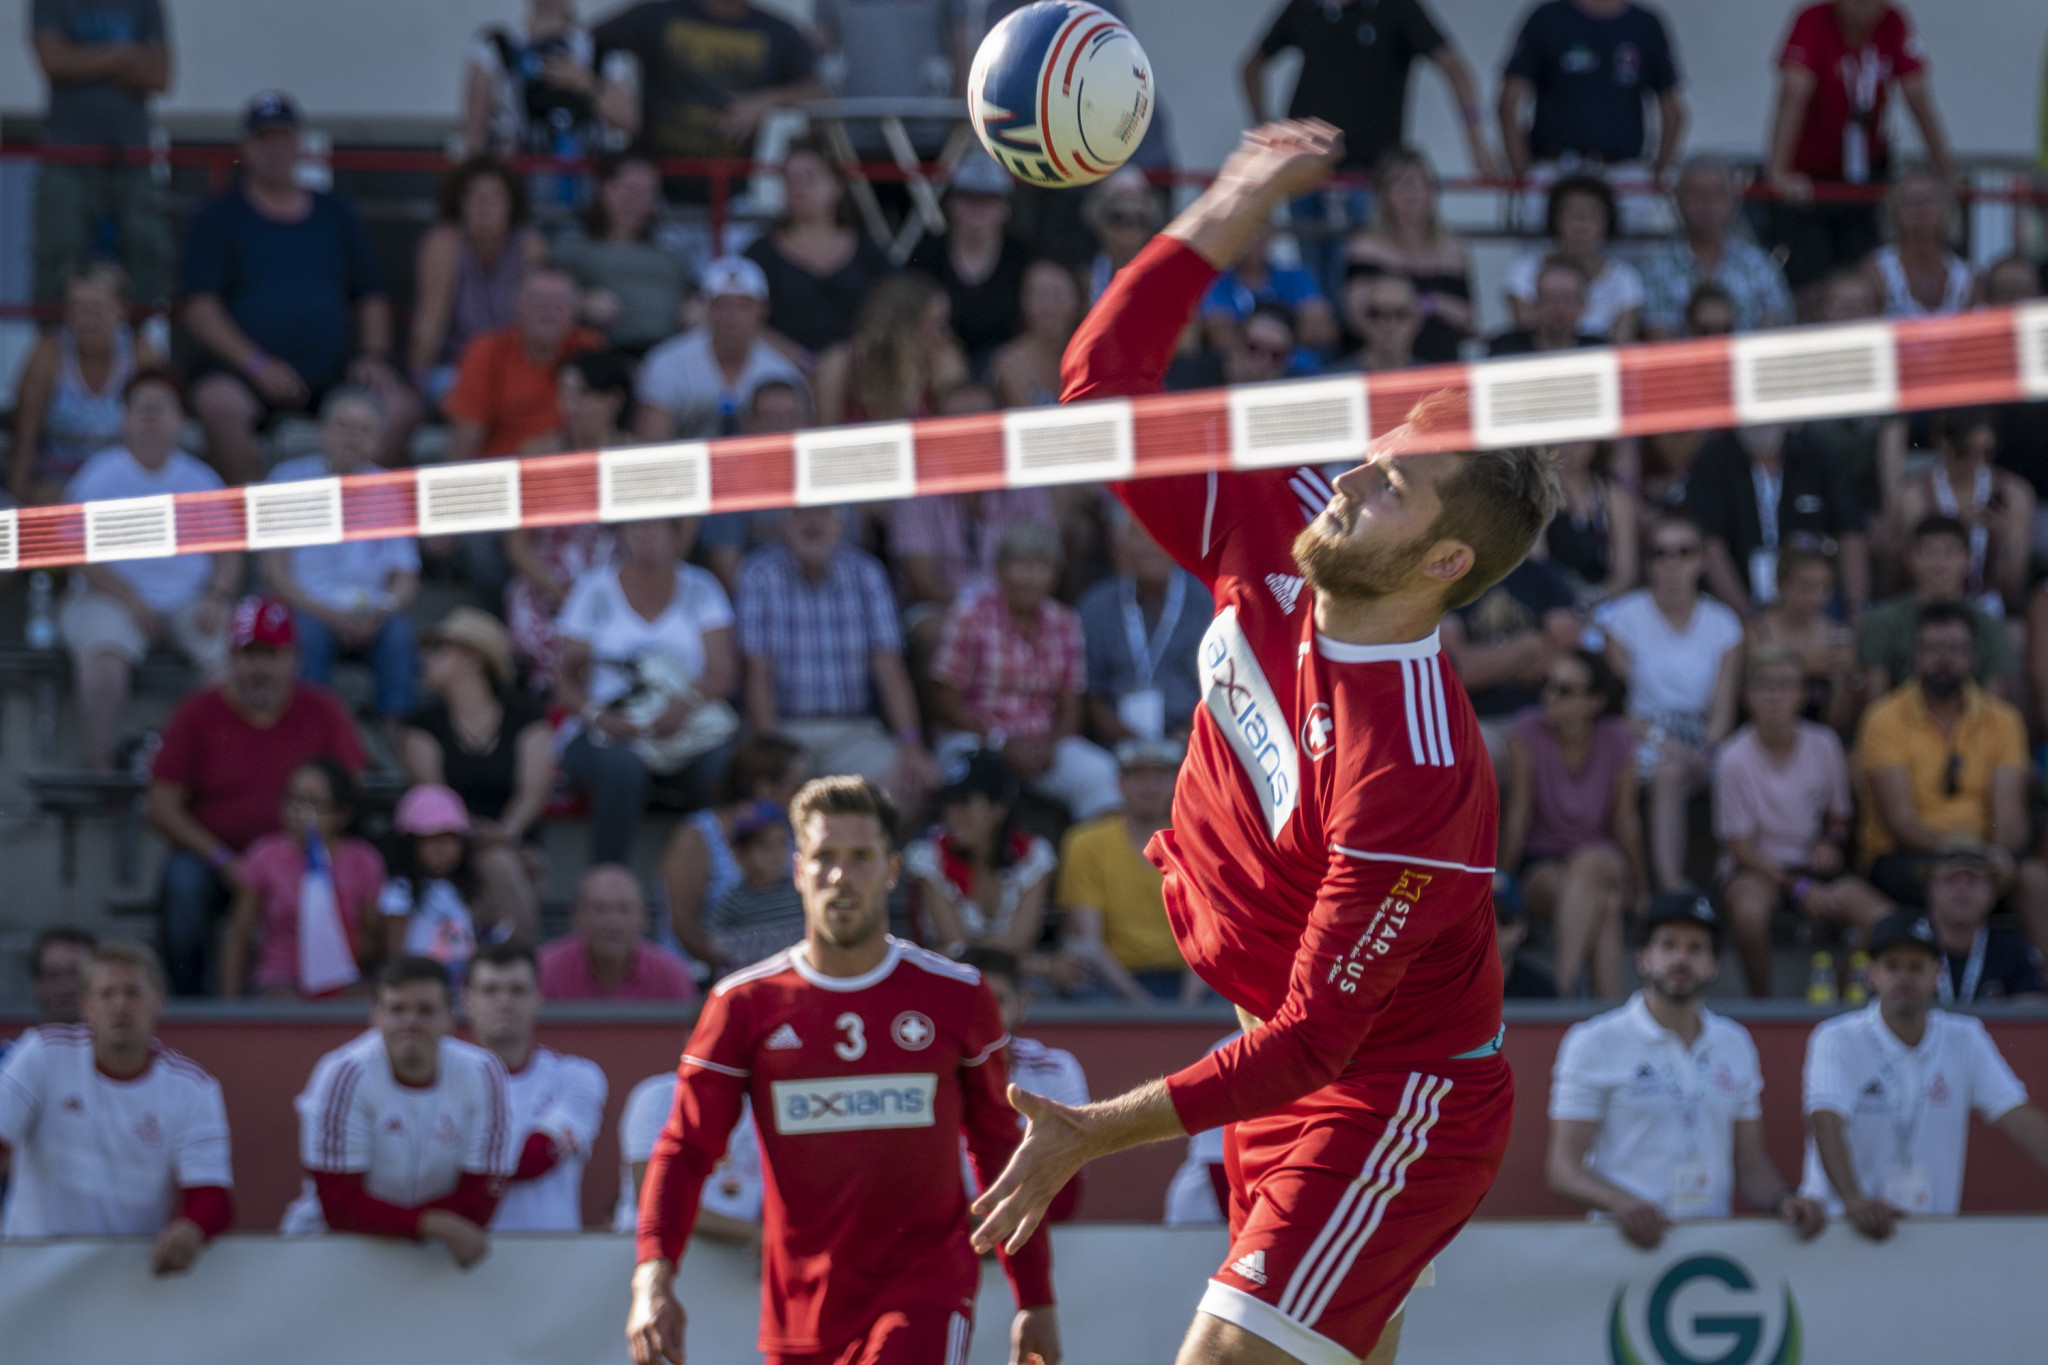 Hosts Switzerland won 3-0 against Chile as the International Fistball Association World Fistball Championships began in Winterthur ©IFA 